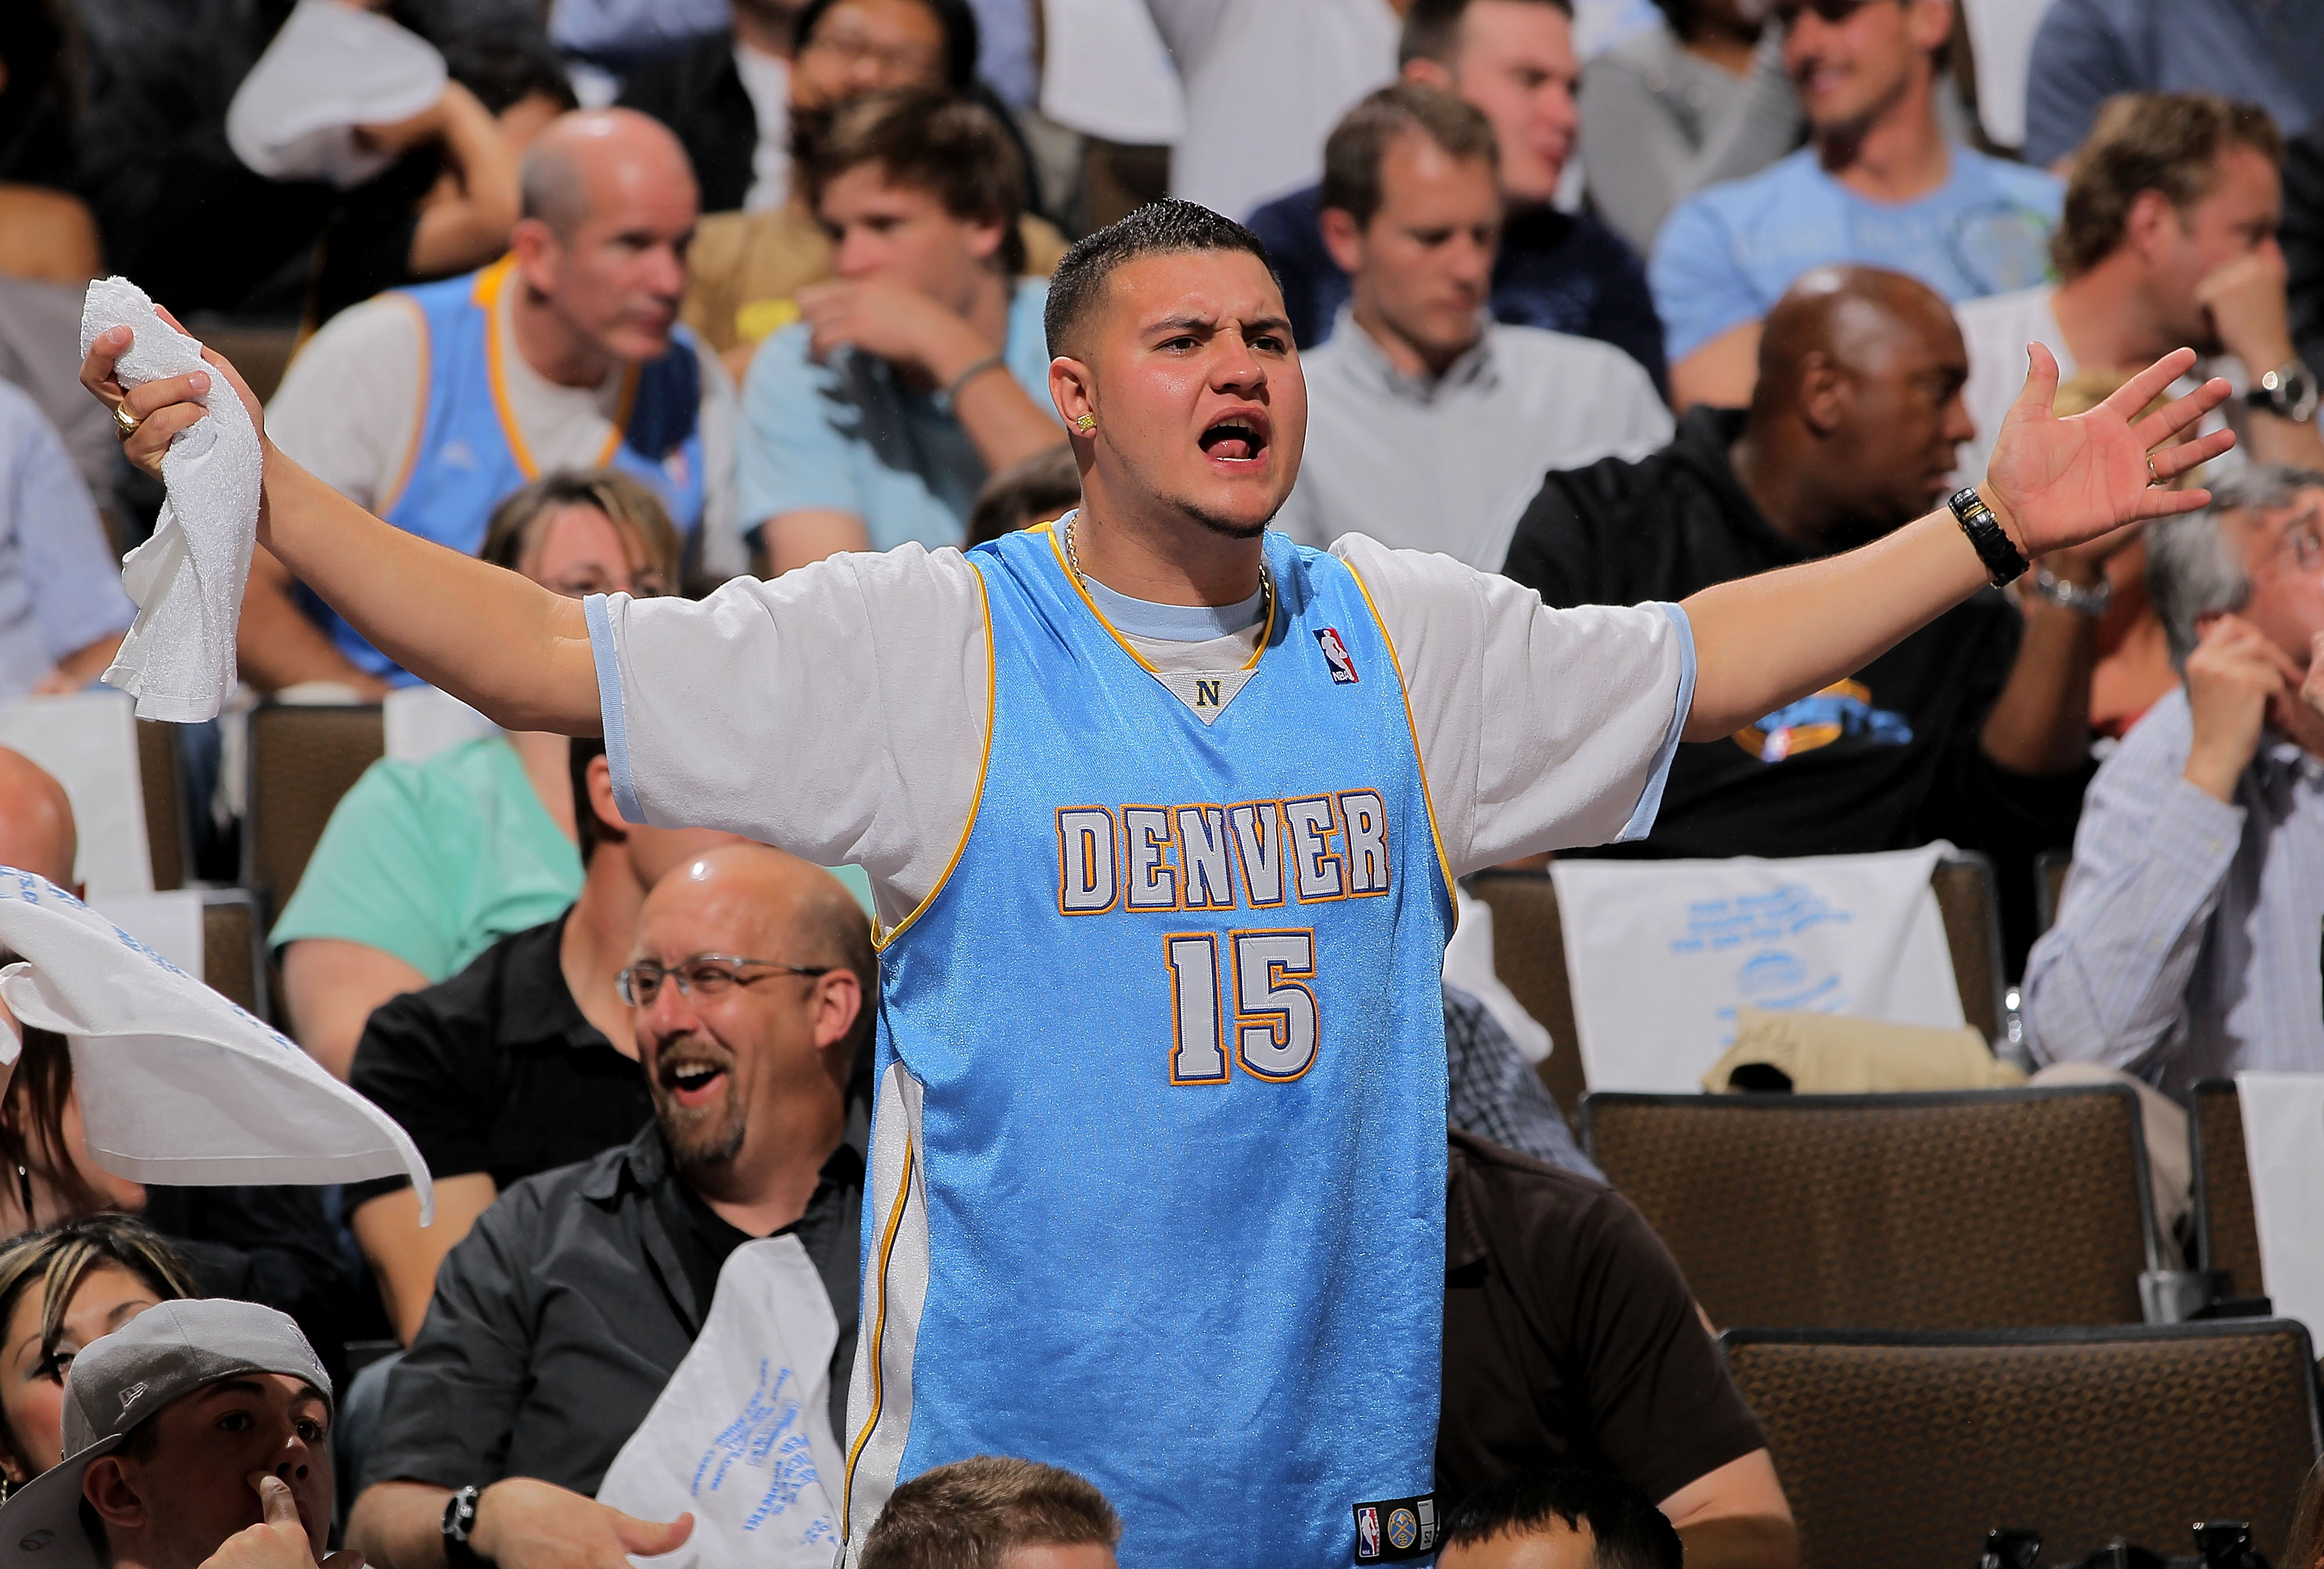 DENVER - APRIL 28:  A Denver Nuggets fan reacts during action against the Utah Jazz in Game Five of the Western Conference Quarterfinals of the 2010 NBA Playoffs at the Pepsi Center on April 28, 2010 in Denver, Colorado. NOTE TO USER: User expressly ackno